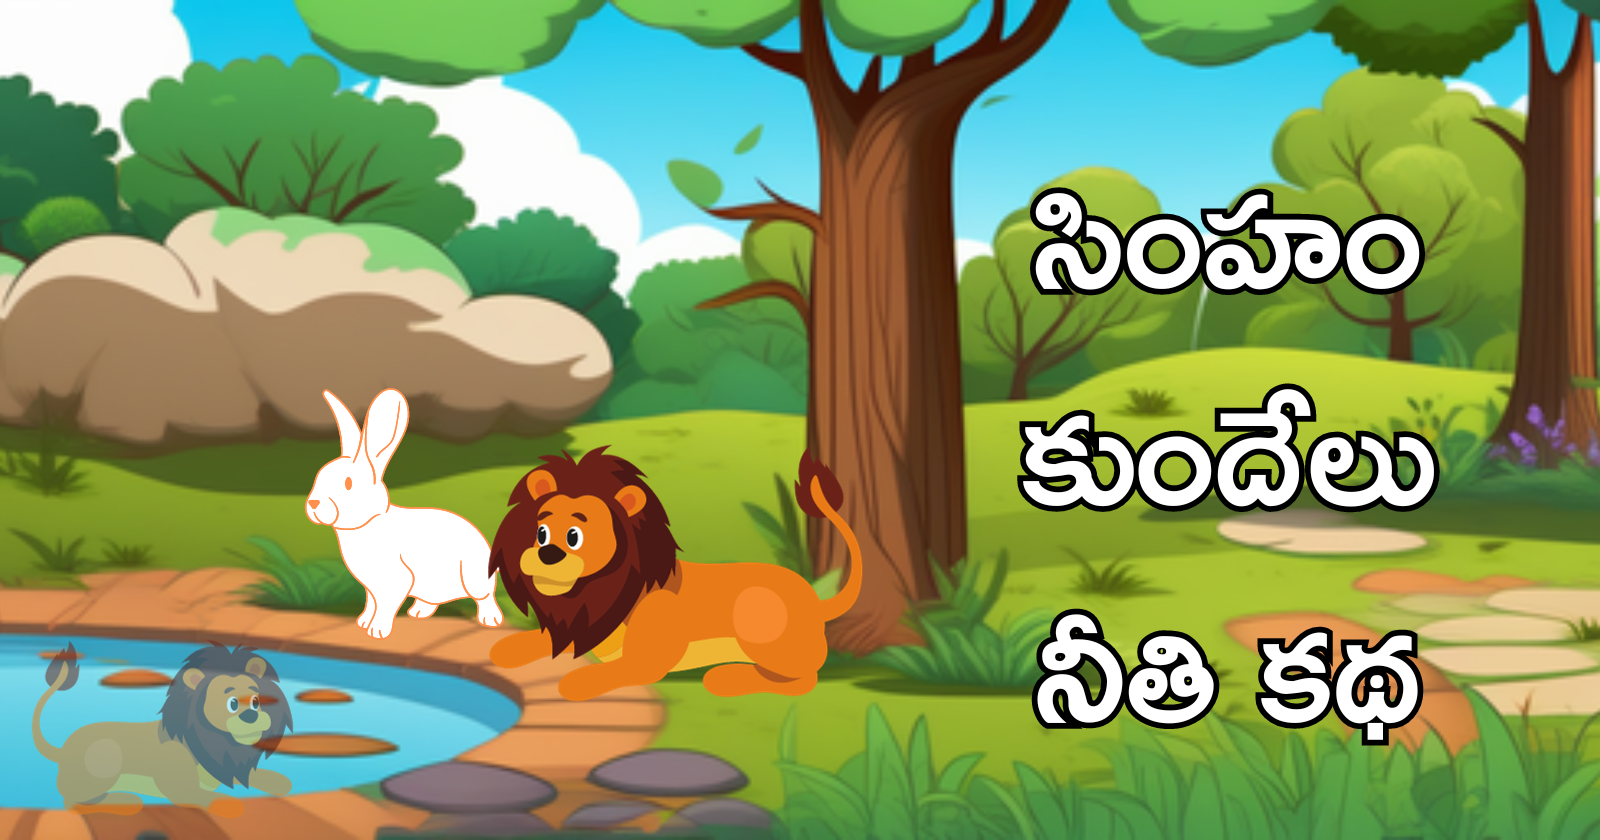 The Lion And The Rabbit Telugu Moral Story